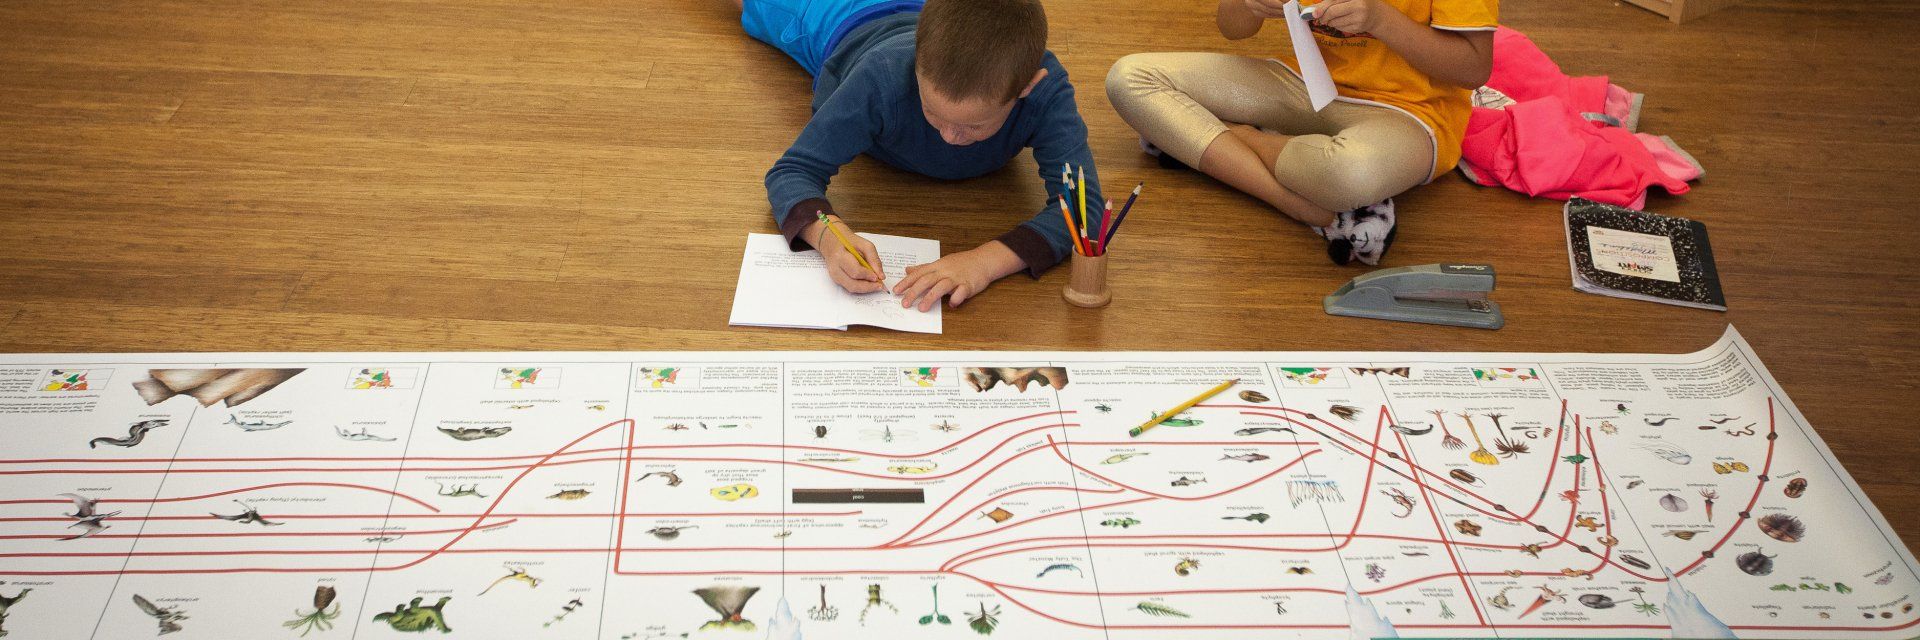 two elementary children on the floor with the timeline of life